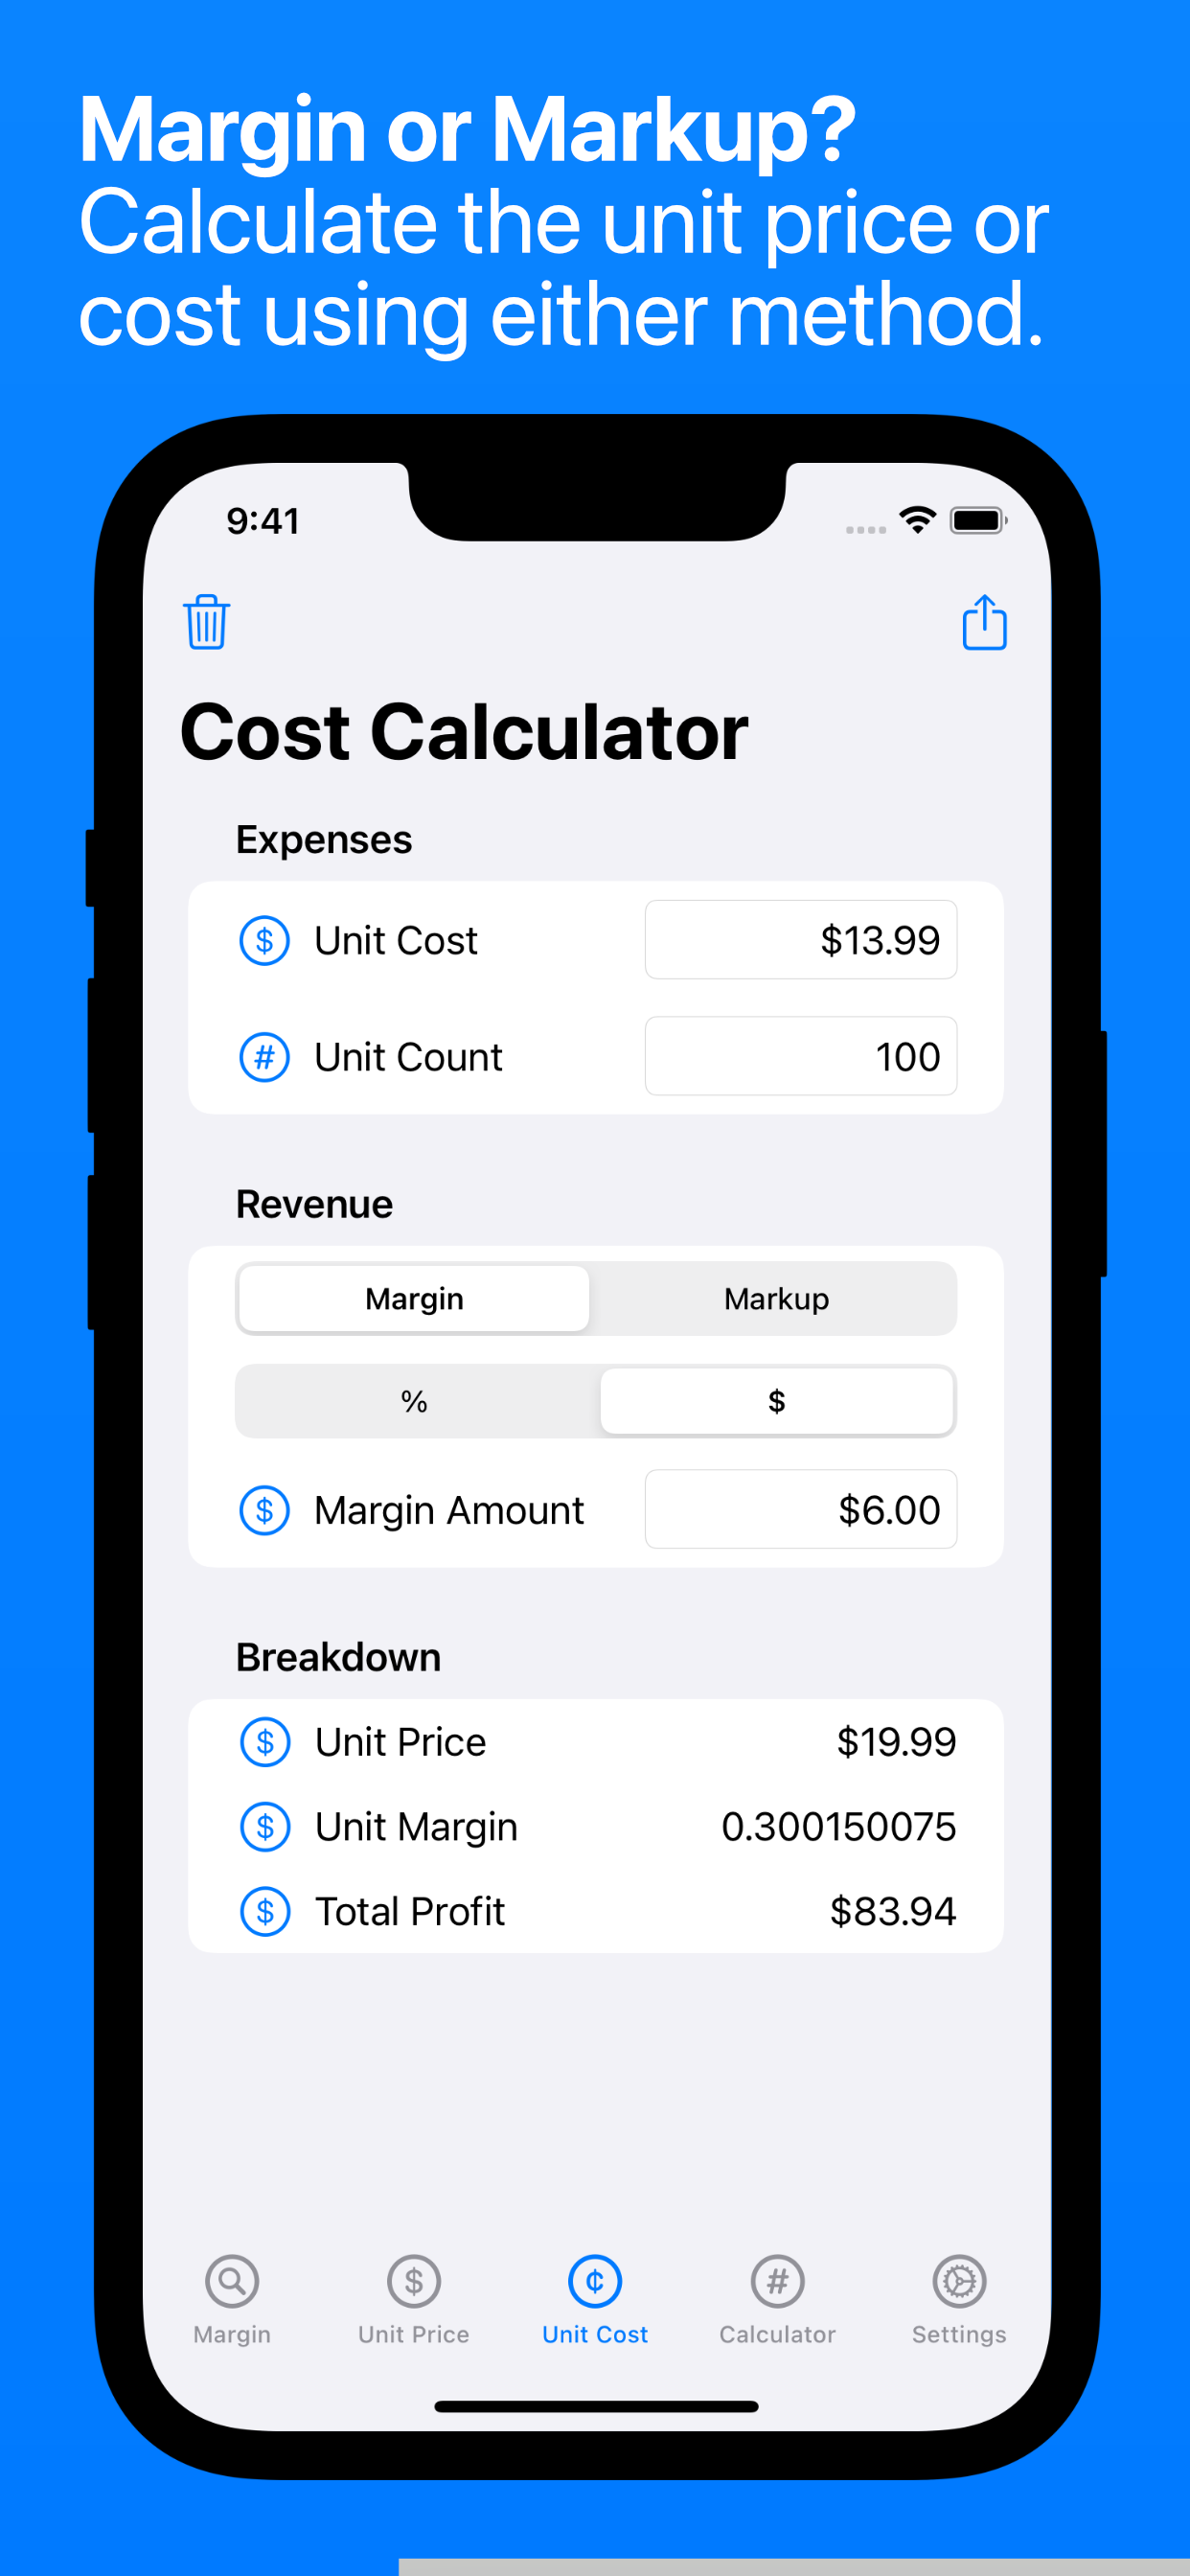 Margin or Markup Calculation on iPhone